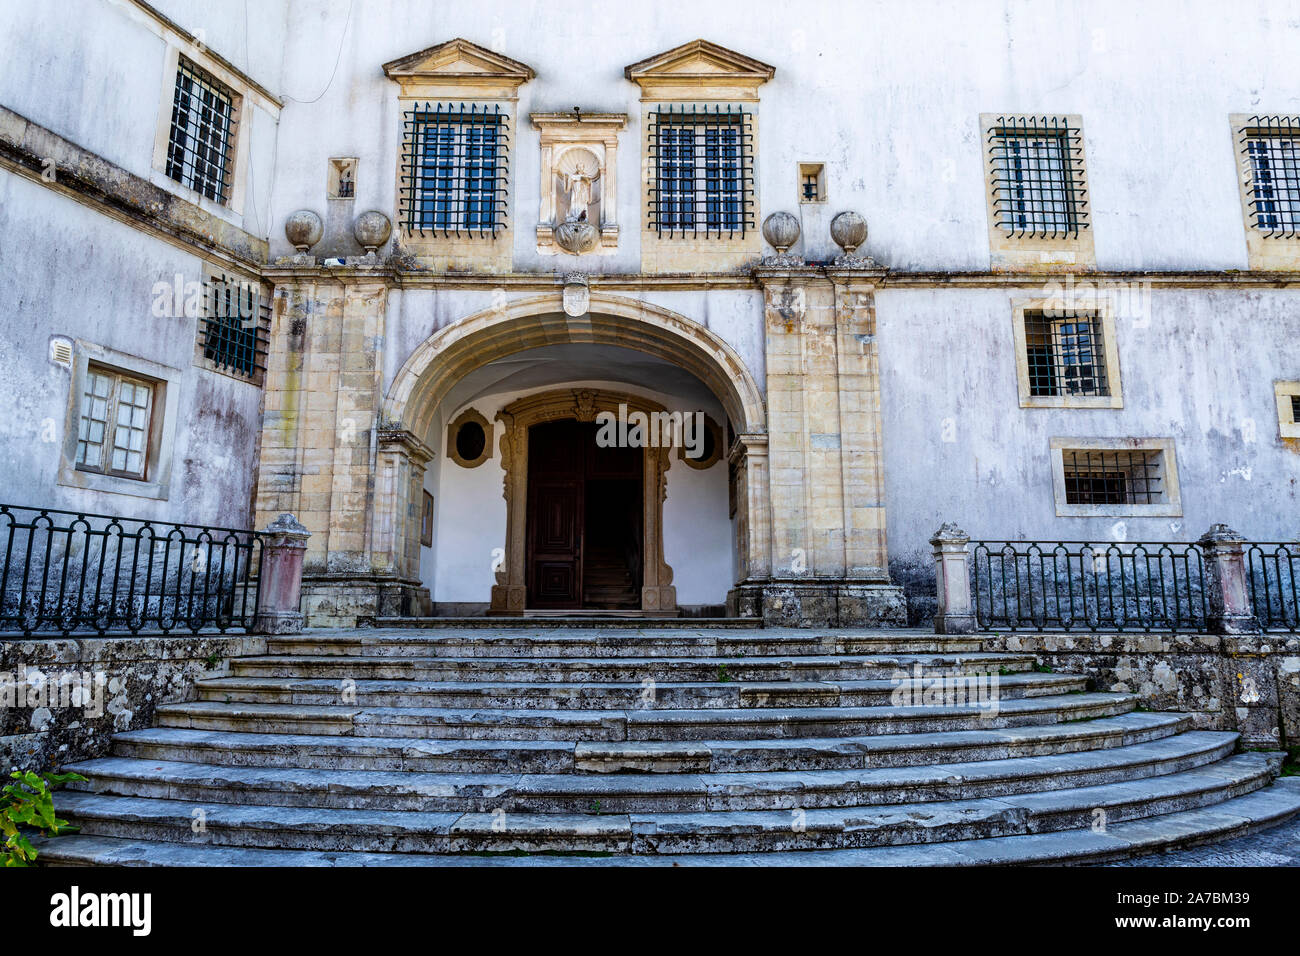 Portico of the main entrance to the Monastery of Saint Mary, built in 1630 (17th century) in Baroque style, in Lorvao, Coimbra, Portugal Stock Photo